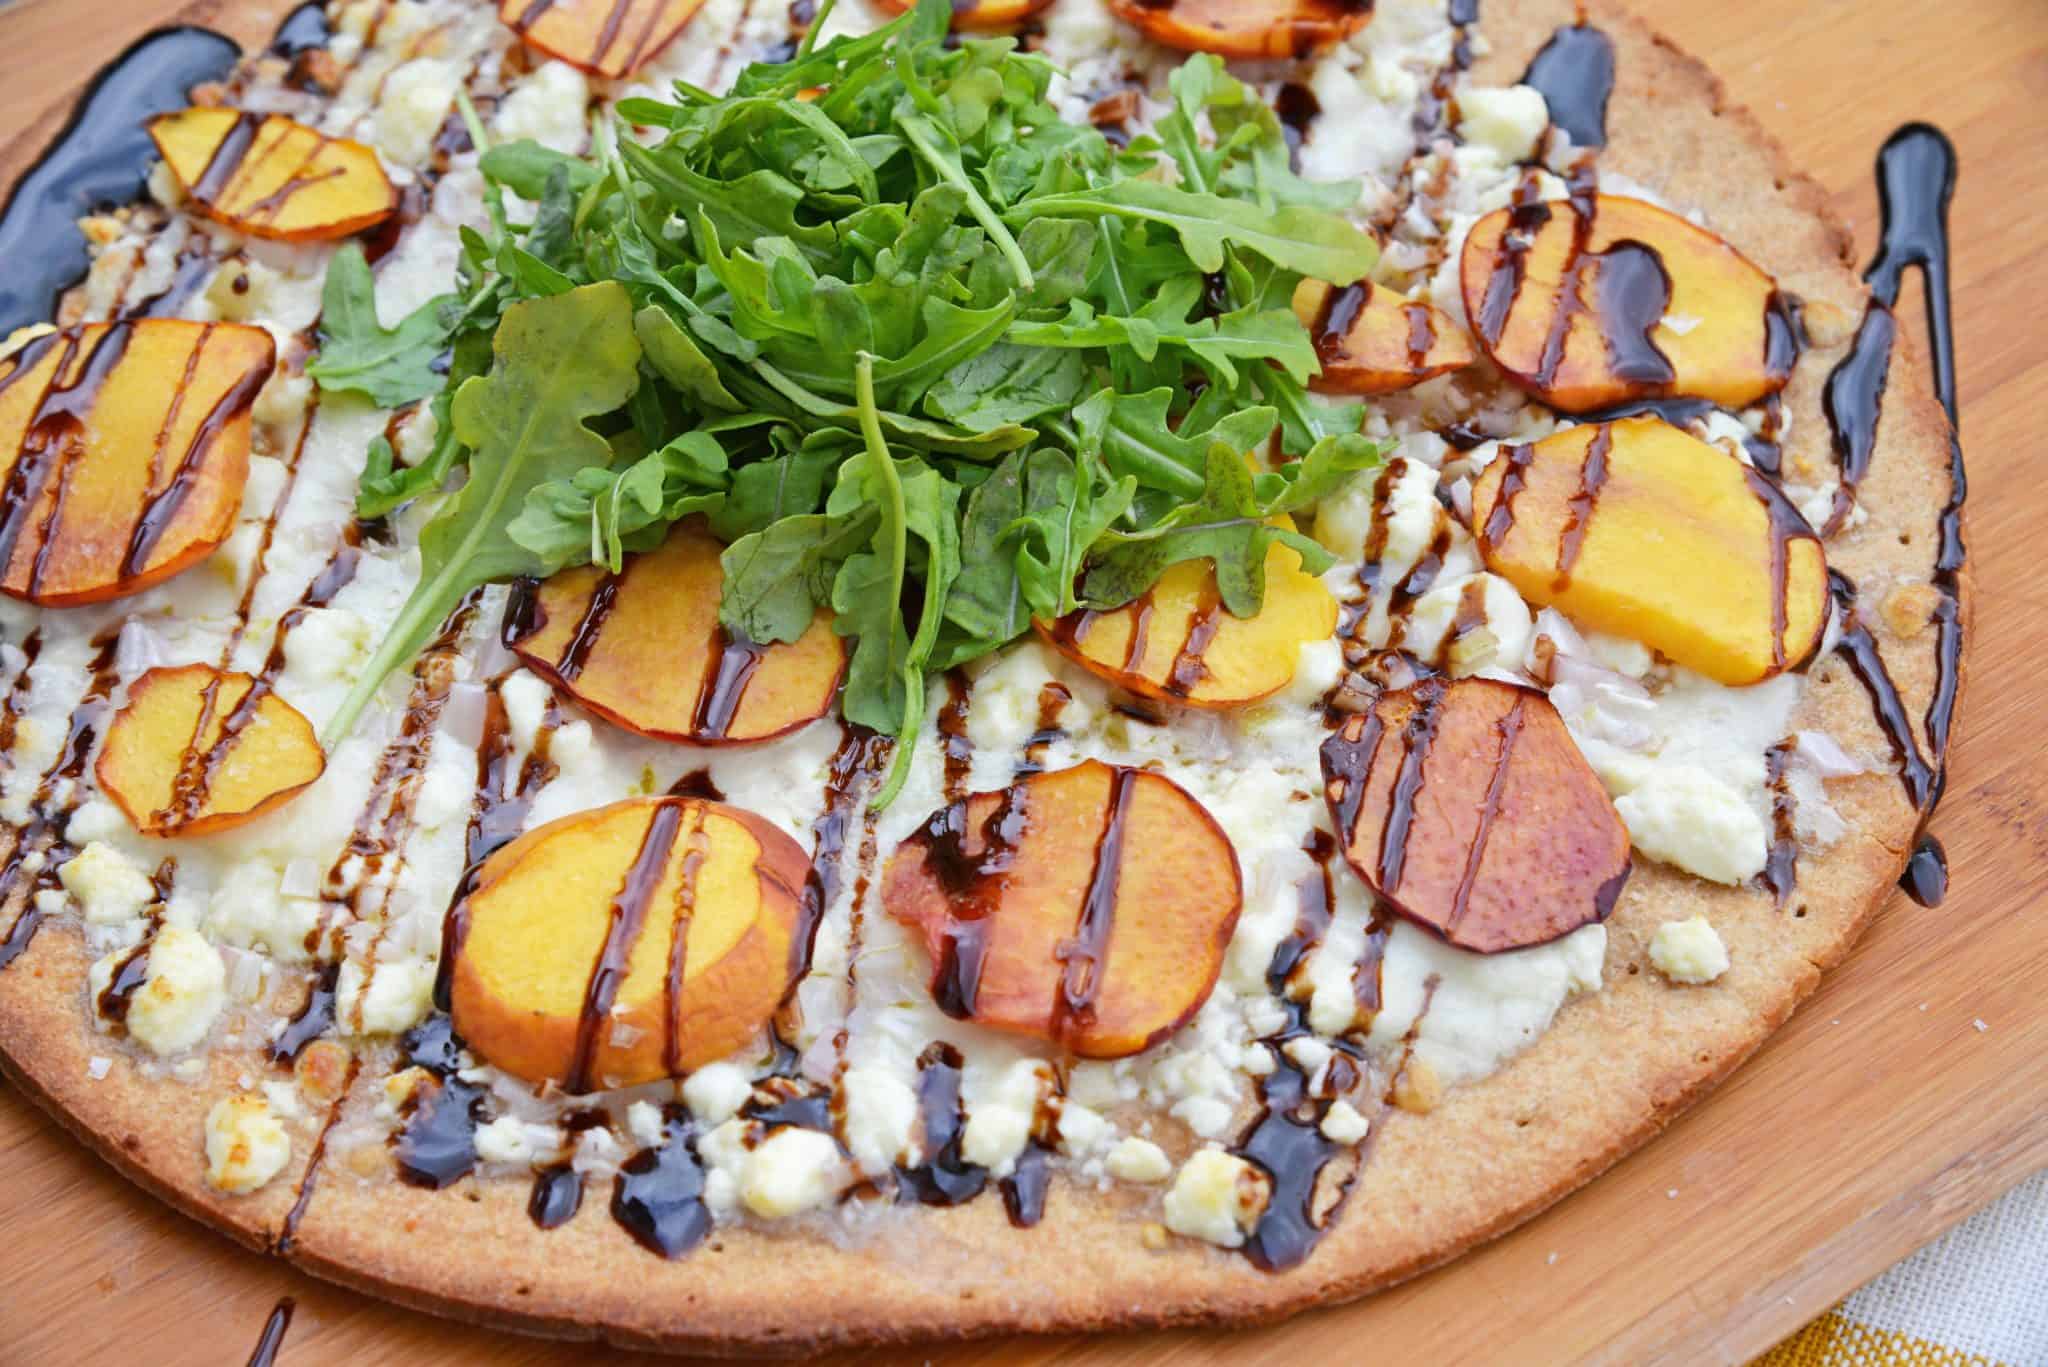 Peach & Gorgonzola Pizza with Balsamic Reduction